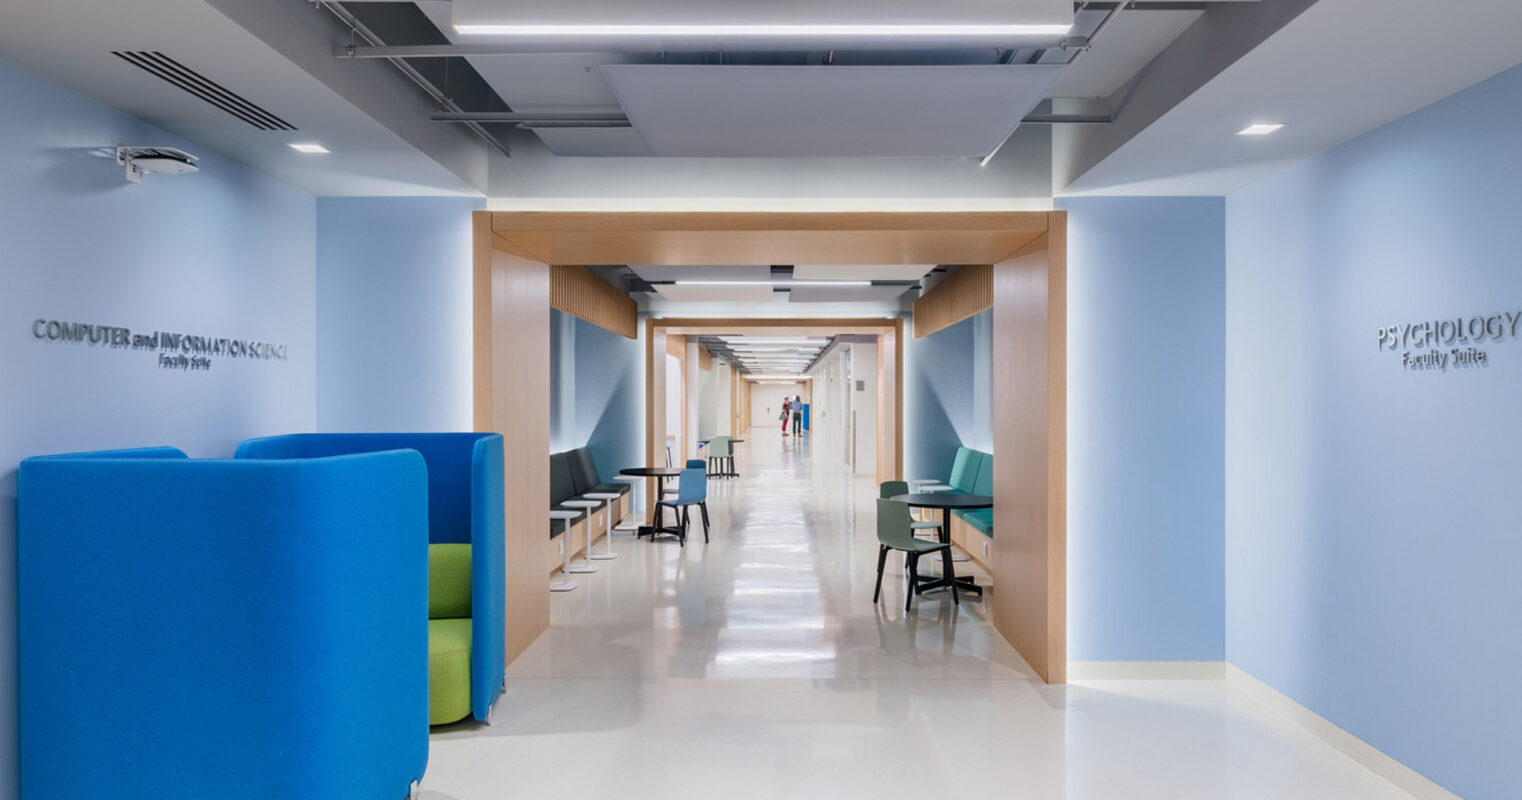 Modern educational facility corridor featuring a vibrant blue and green color scheme, with collaborative seating areas, sleek white flooring, and wall-mounted departmental signage promoting an inviting learning environment.